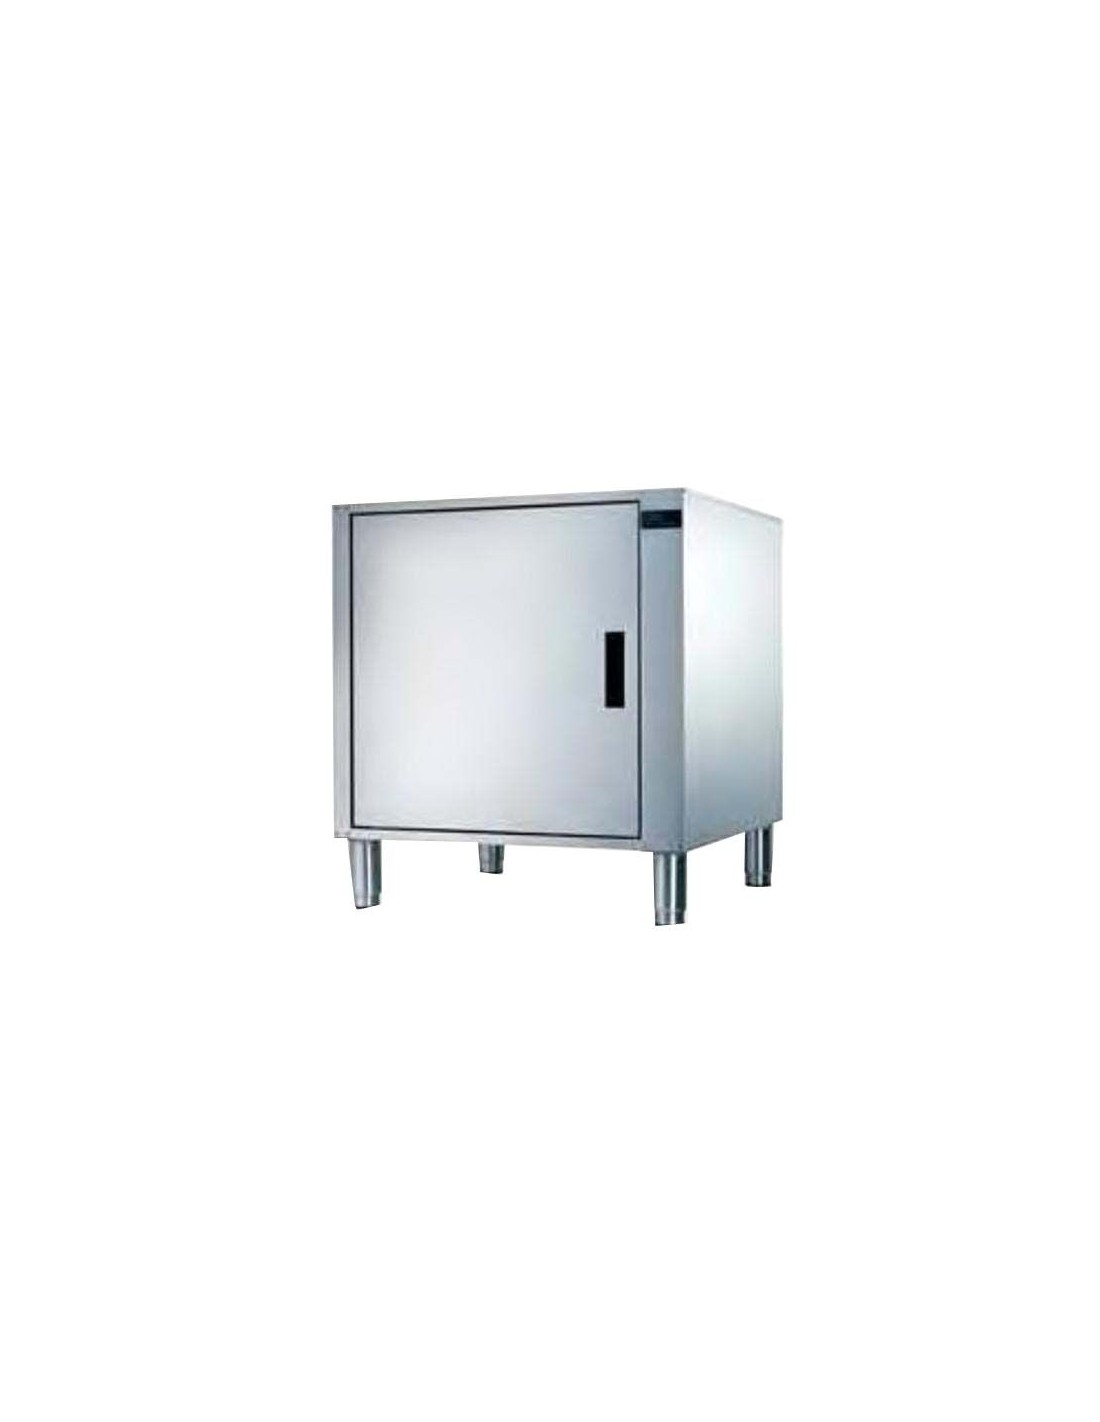 Neutral cabinet - Capacity tile n. 16 GN 1/1 - Space between the pans cm 6.5 - Dimensions cm 71.5 x 70.8 x 80 h